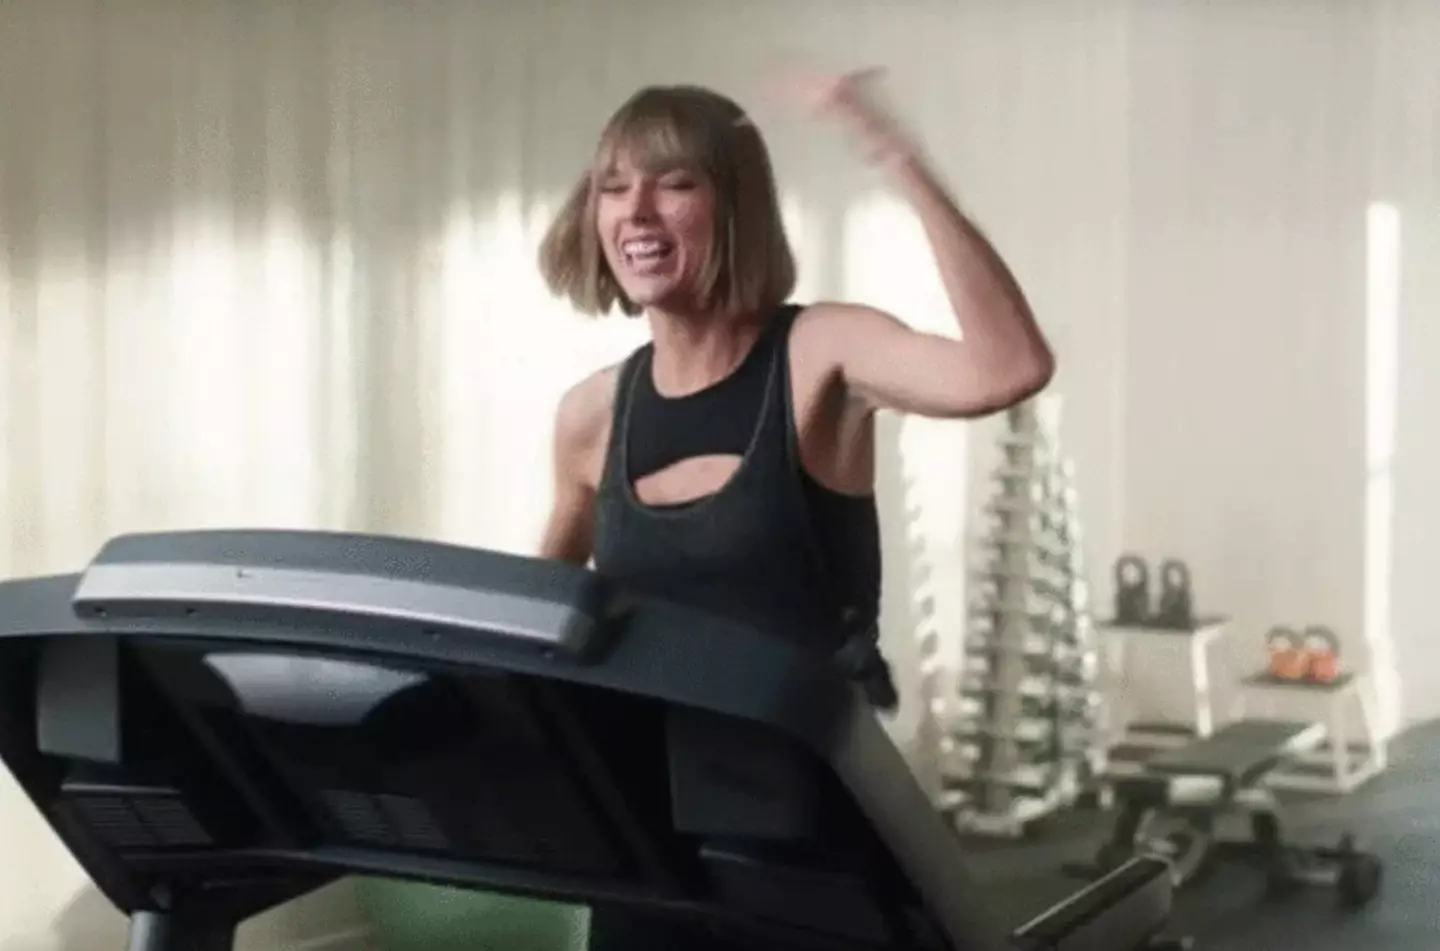 The singer has revealed she'd sing her entire set list whilst running on a treadmill to prepare for the tour.